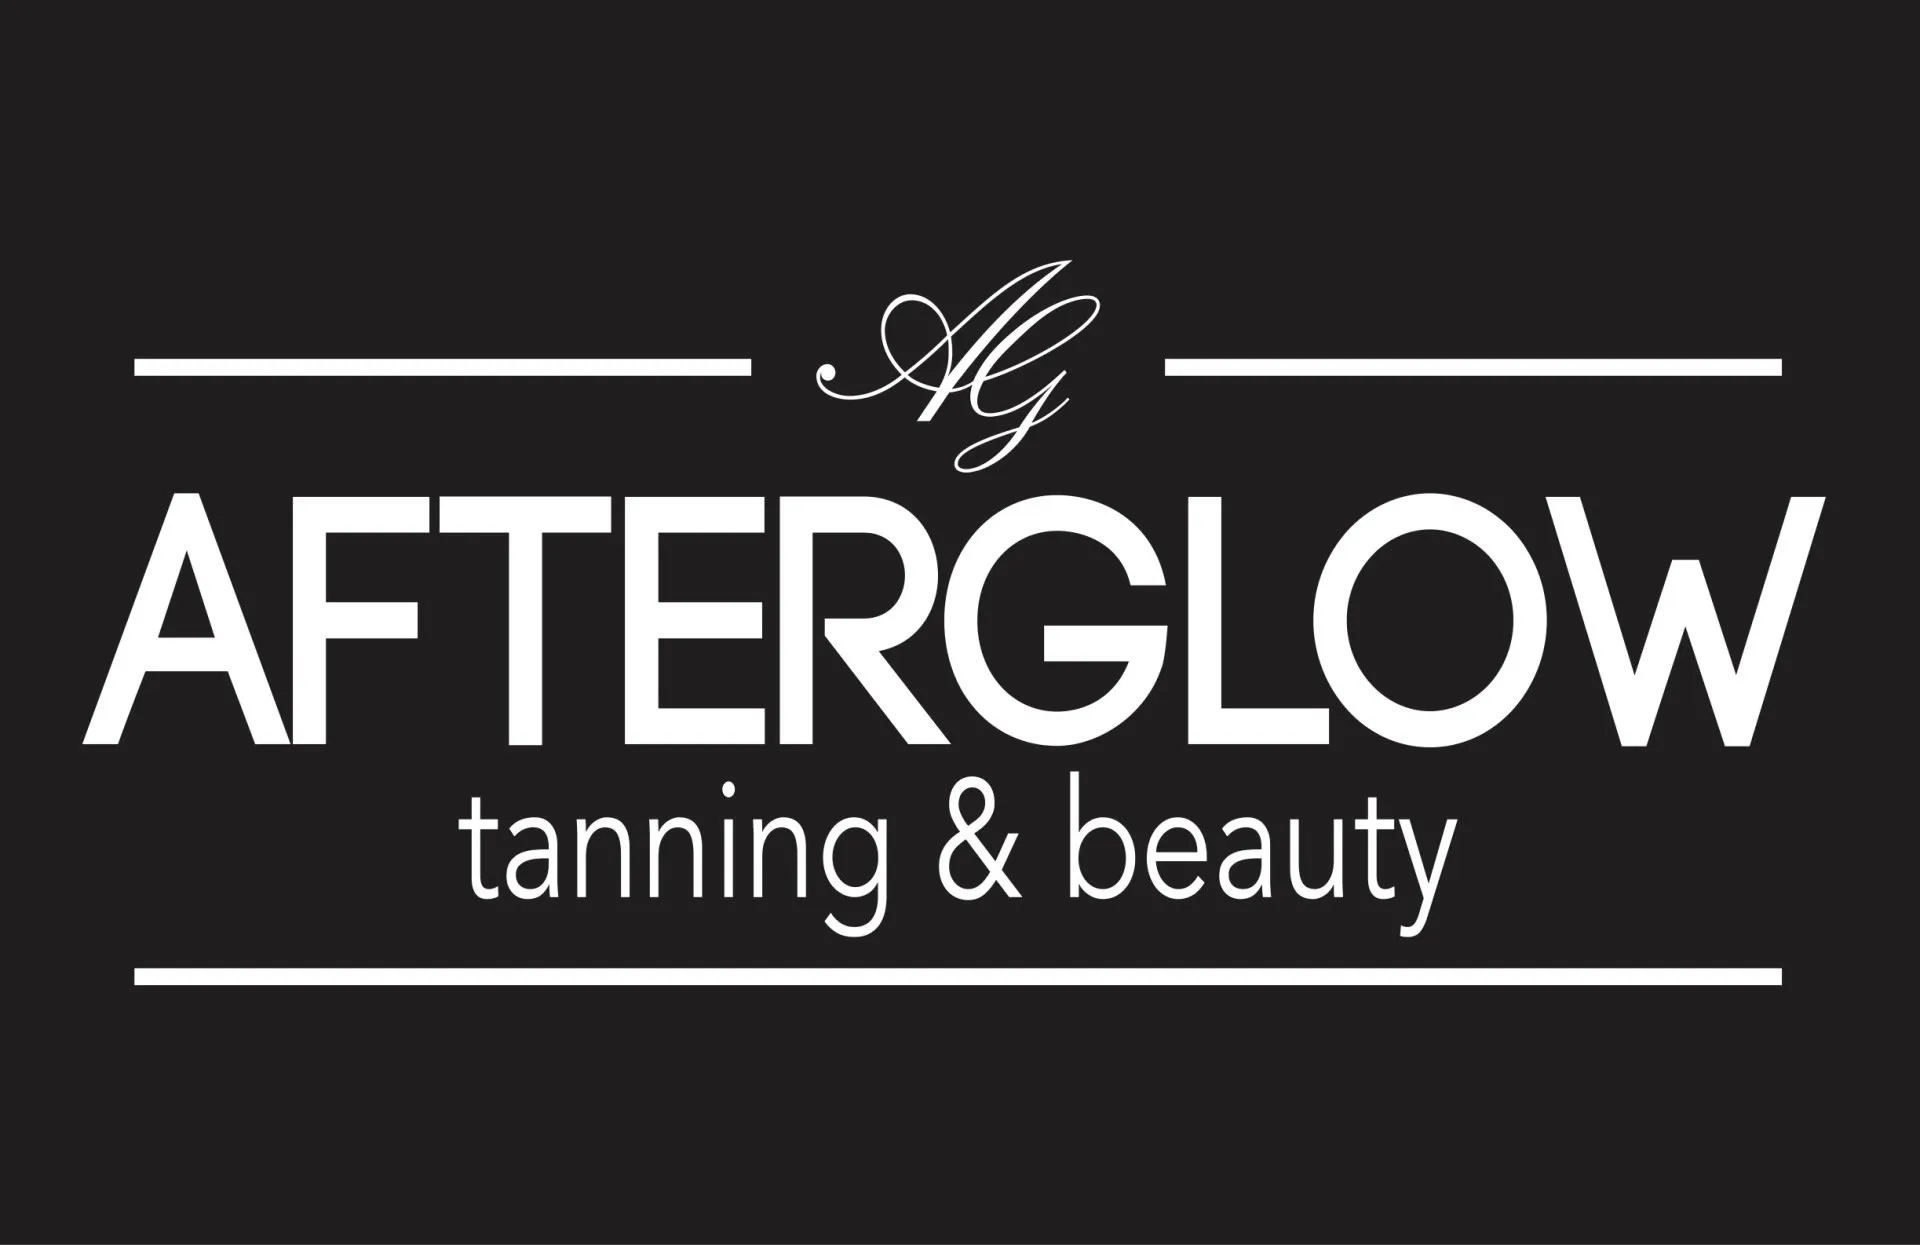 AfterGlow Tanning & Beauty